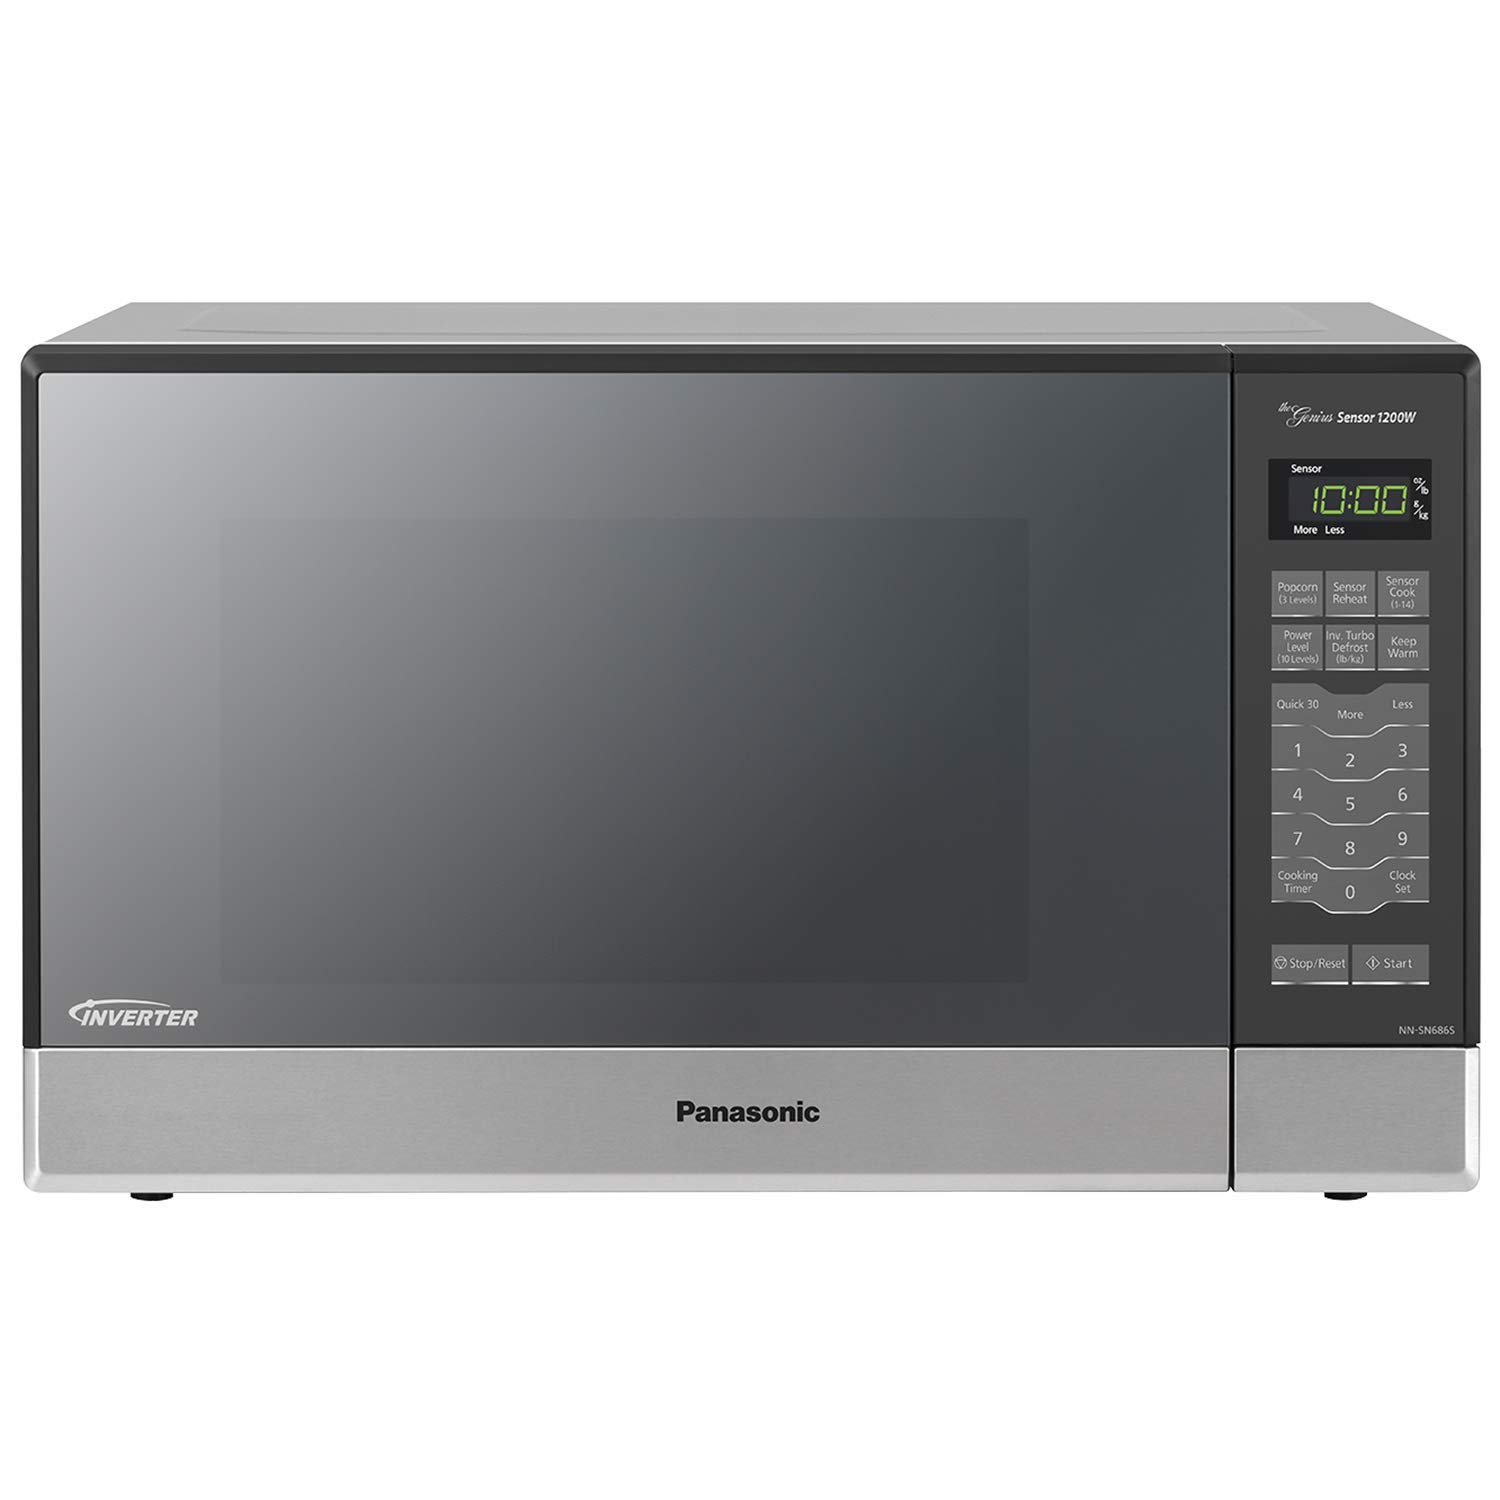 Panasonic Microwave Oven NN-SN686S Stainless Steel Countertop [Review